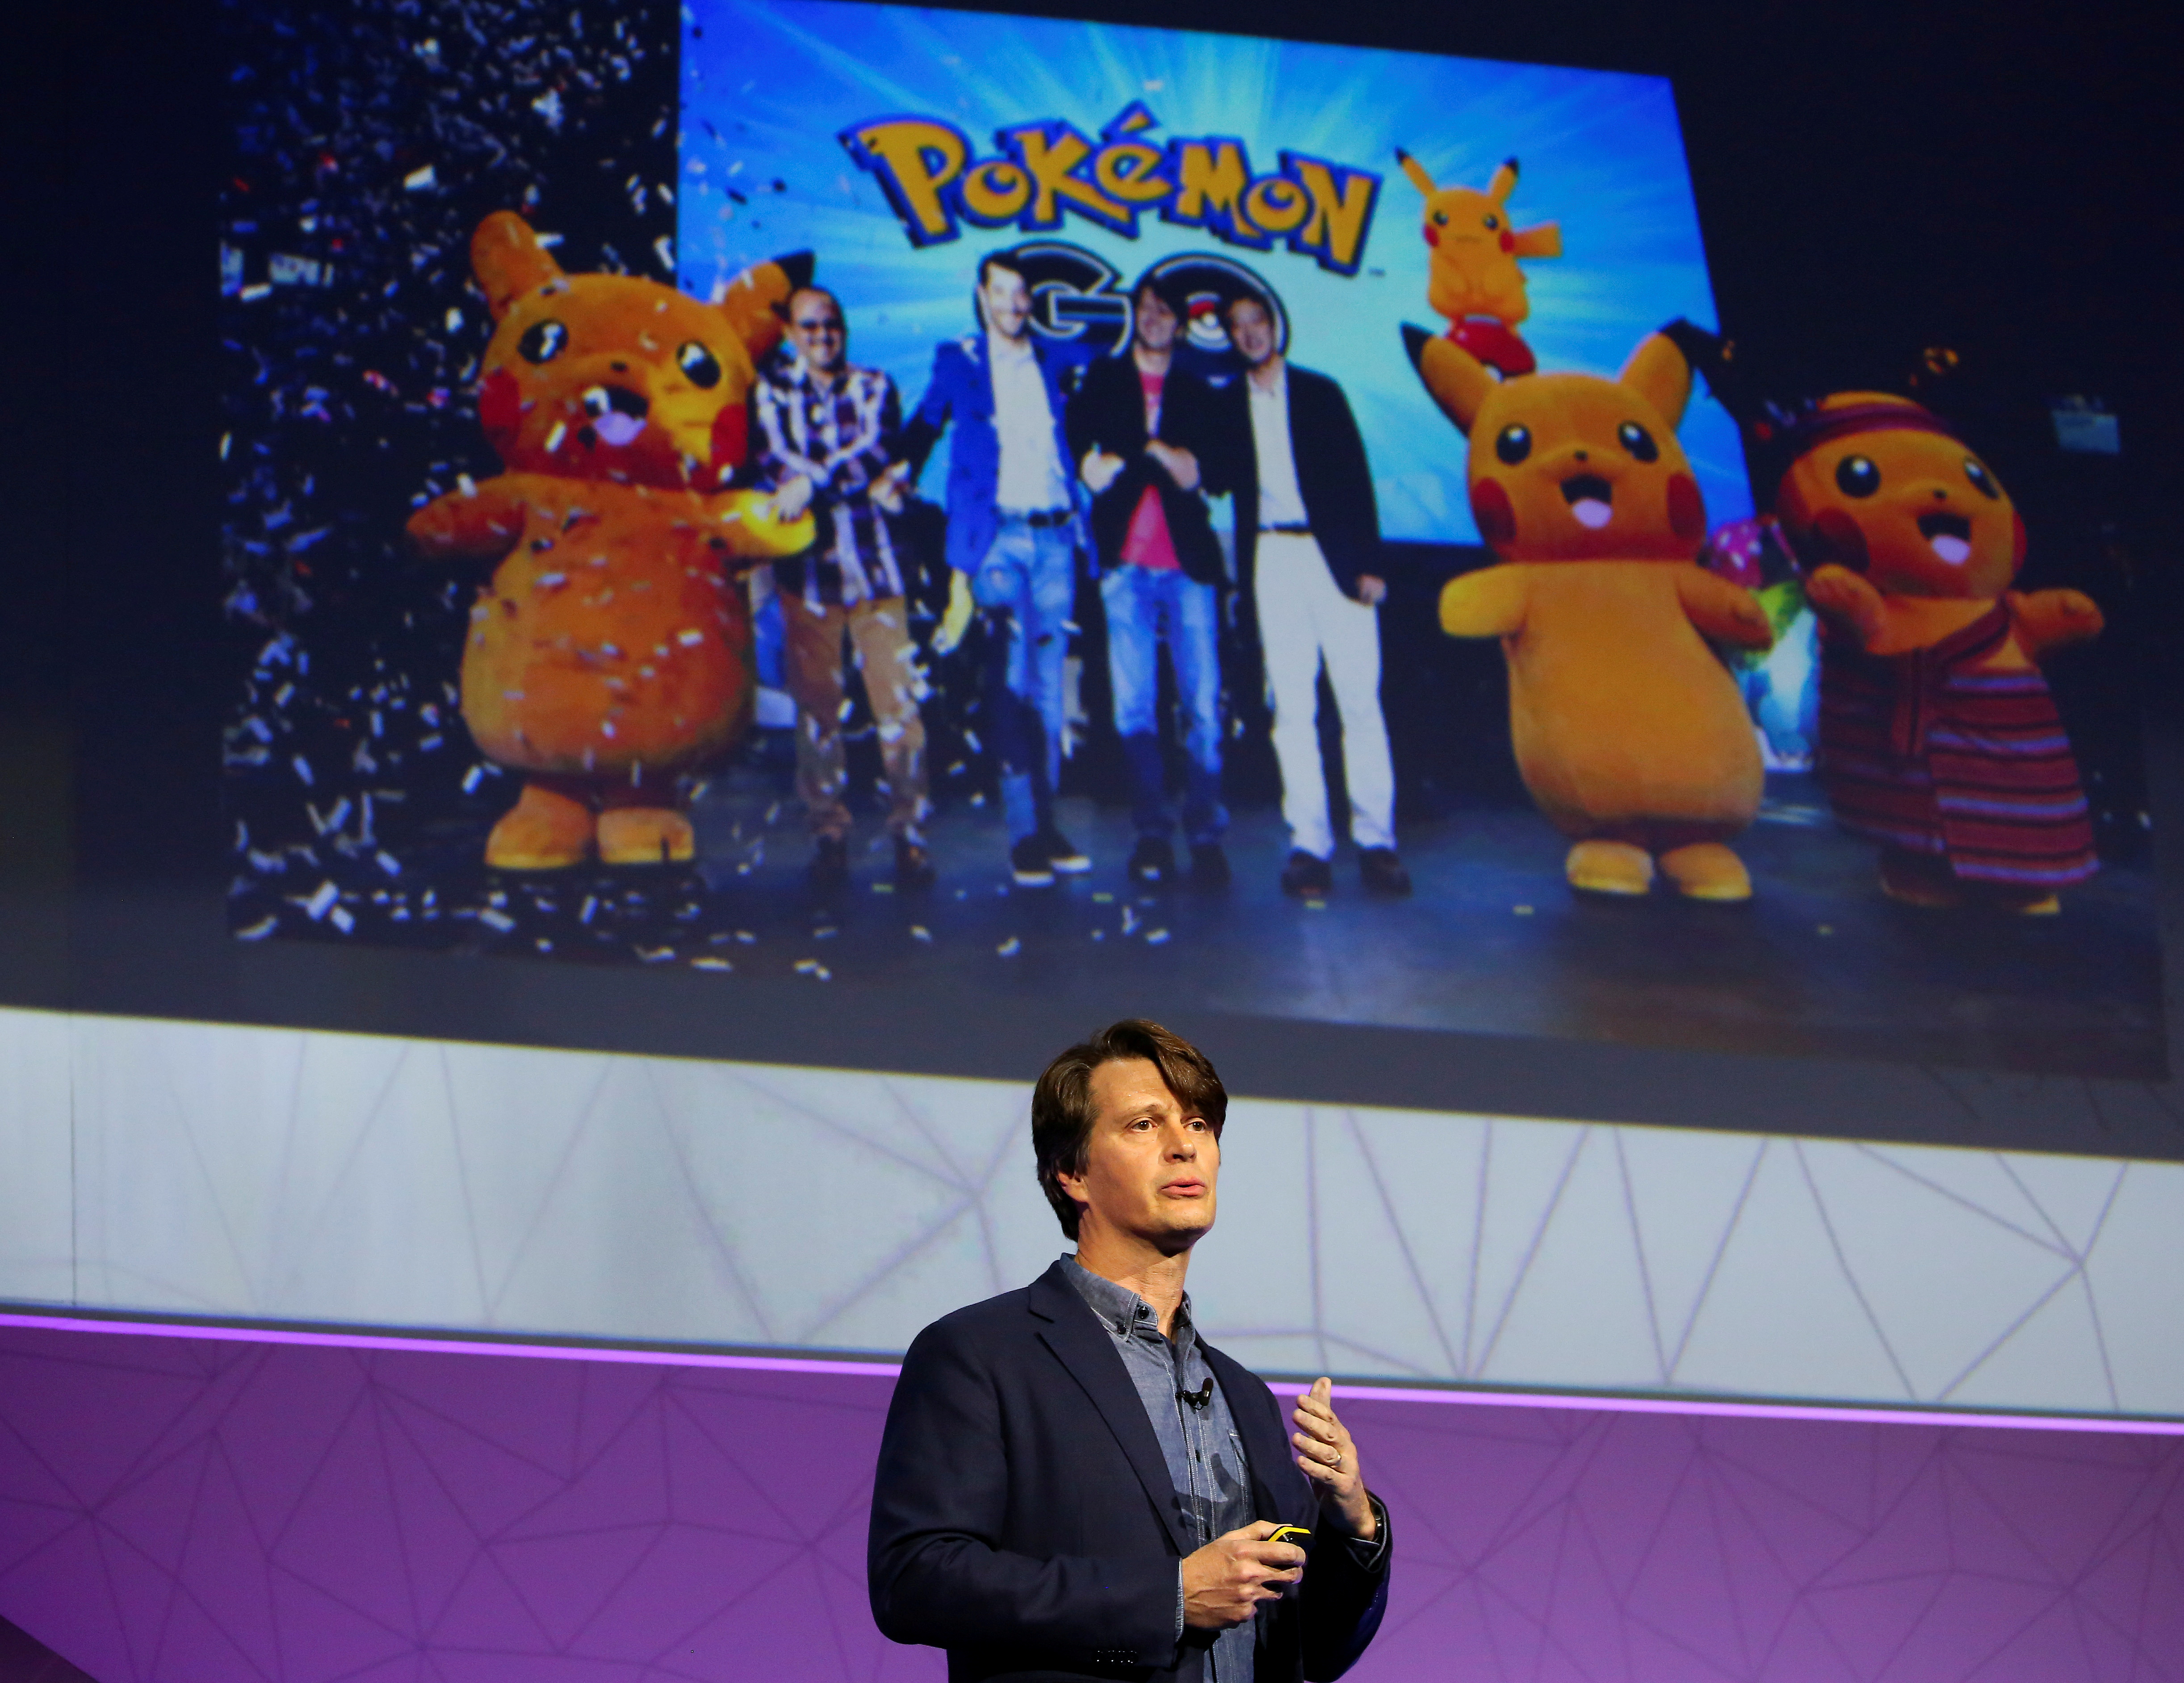 John Hanke, creator of Pokemon Go and Chief Executive Officer of Niantic gestures during his keynote speech at the Mobile World Congress in Barcelona